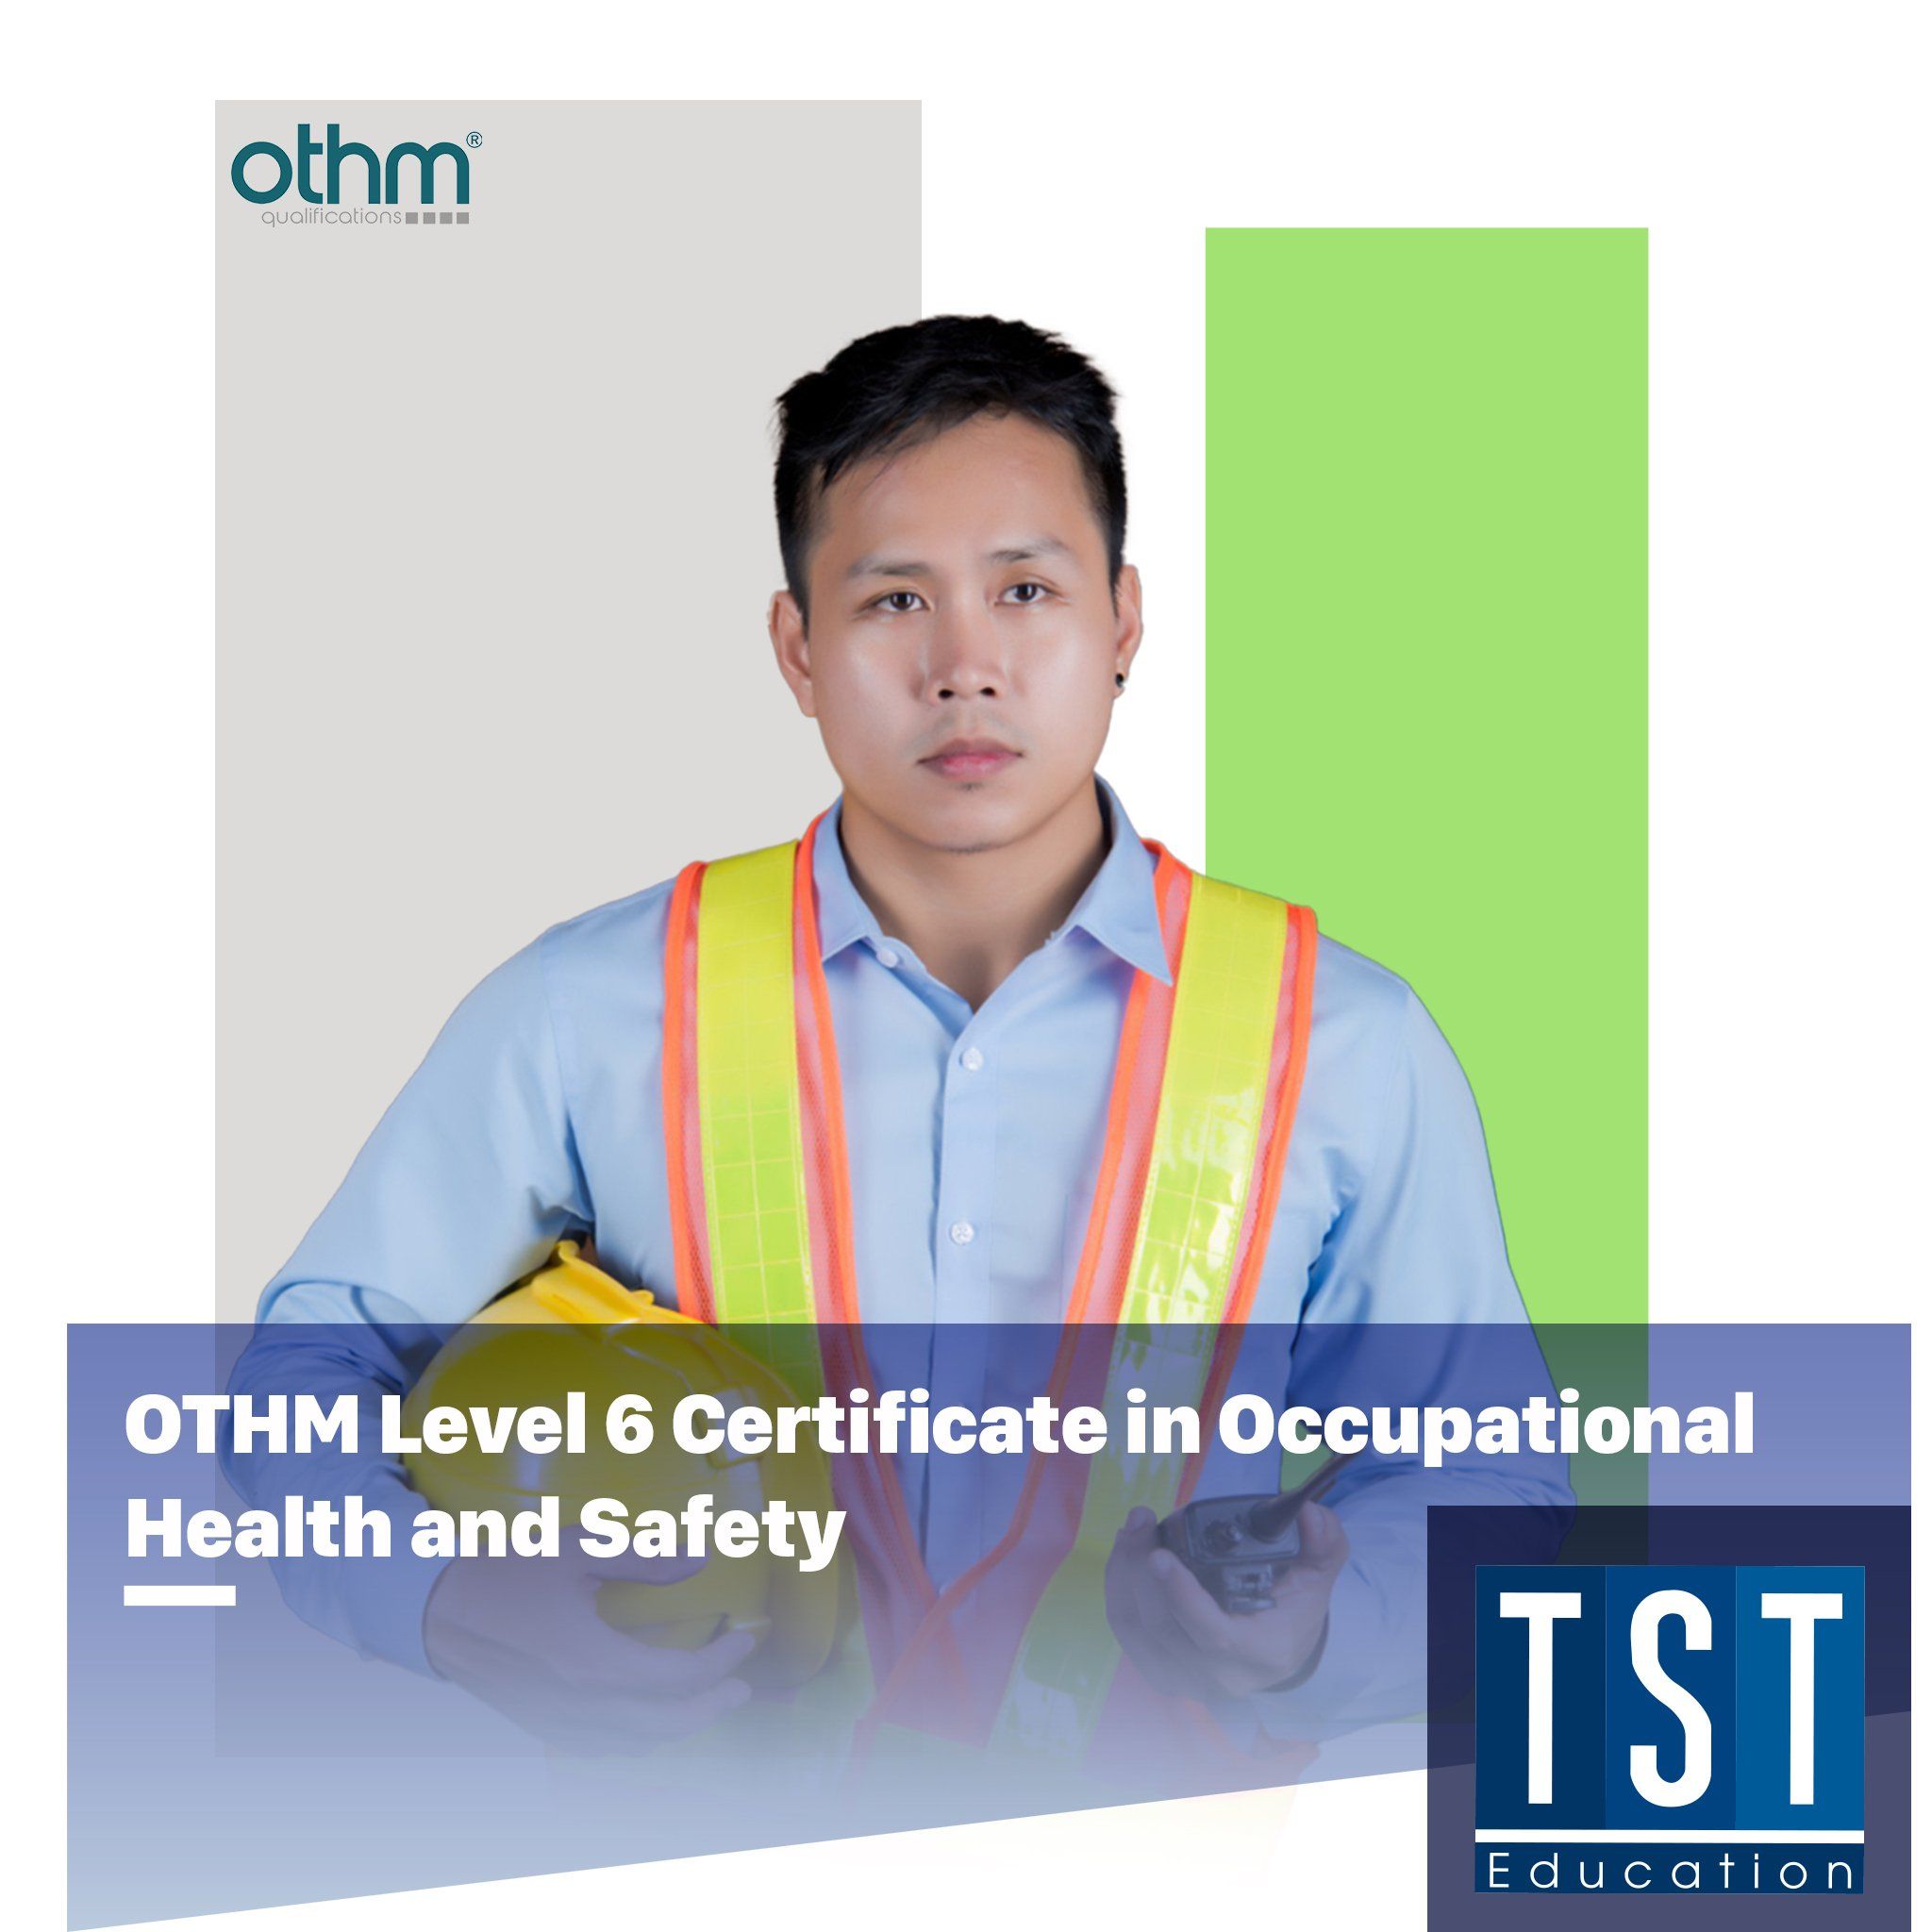  OTHM Level 6 Certificate in Occupational Health and Safety 